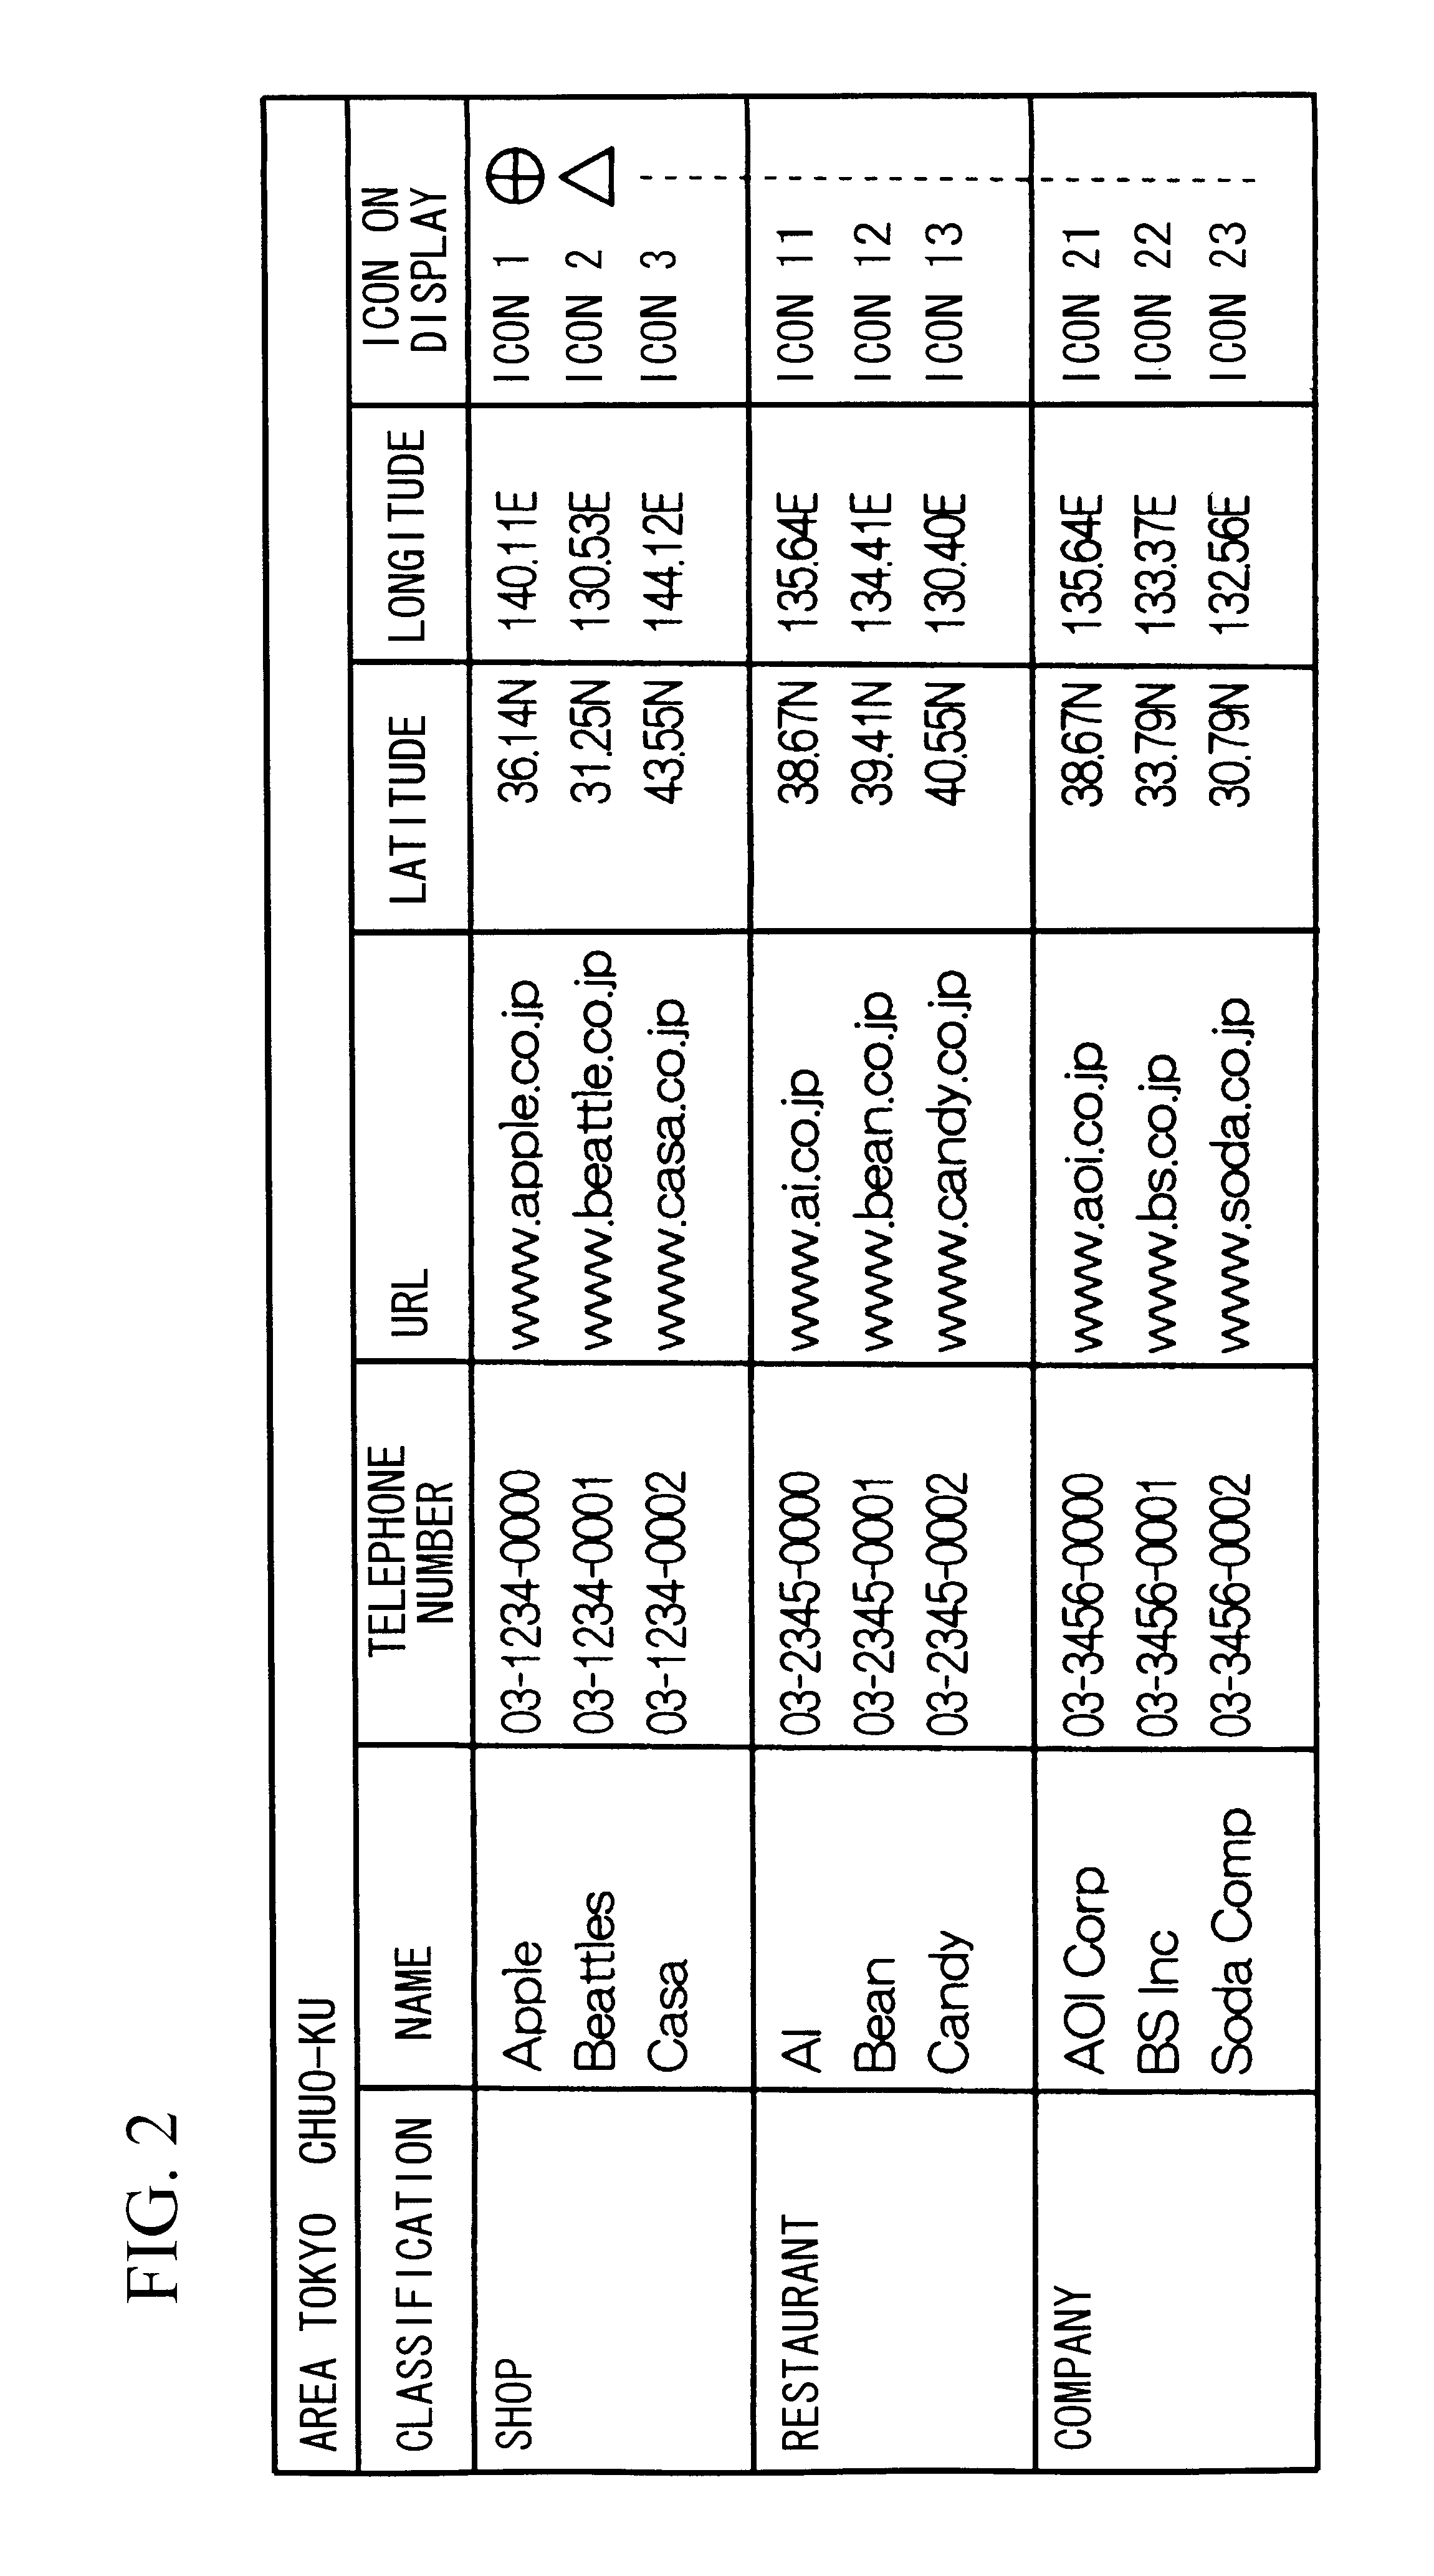 Portable navigation device and system, and online navigation service in wireless communication network